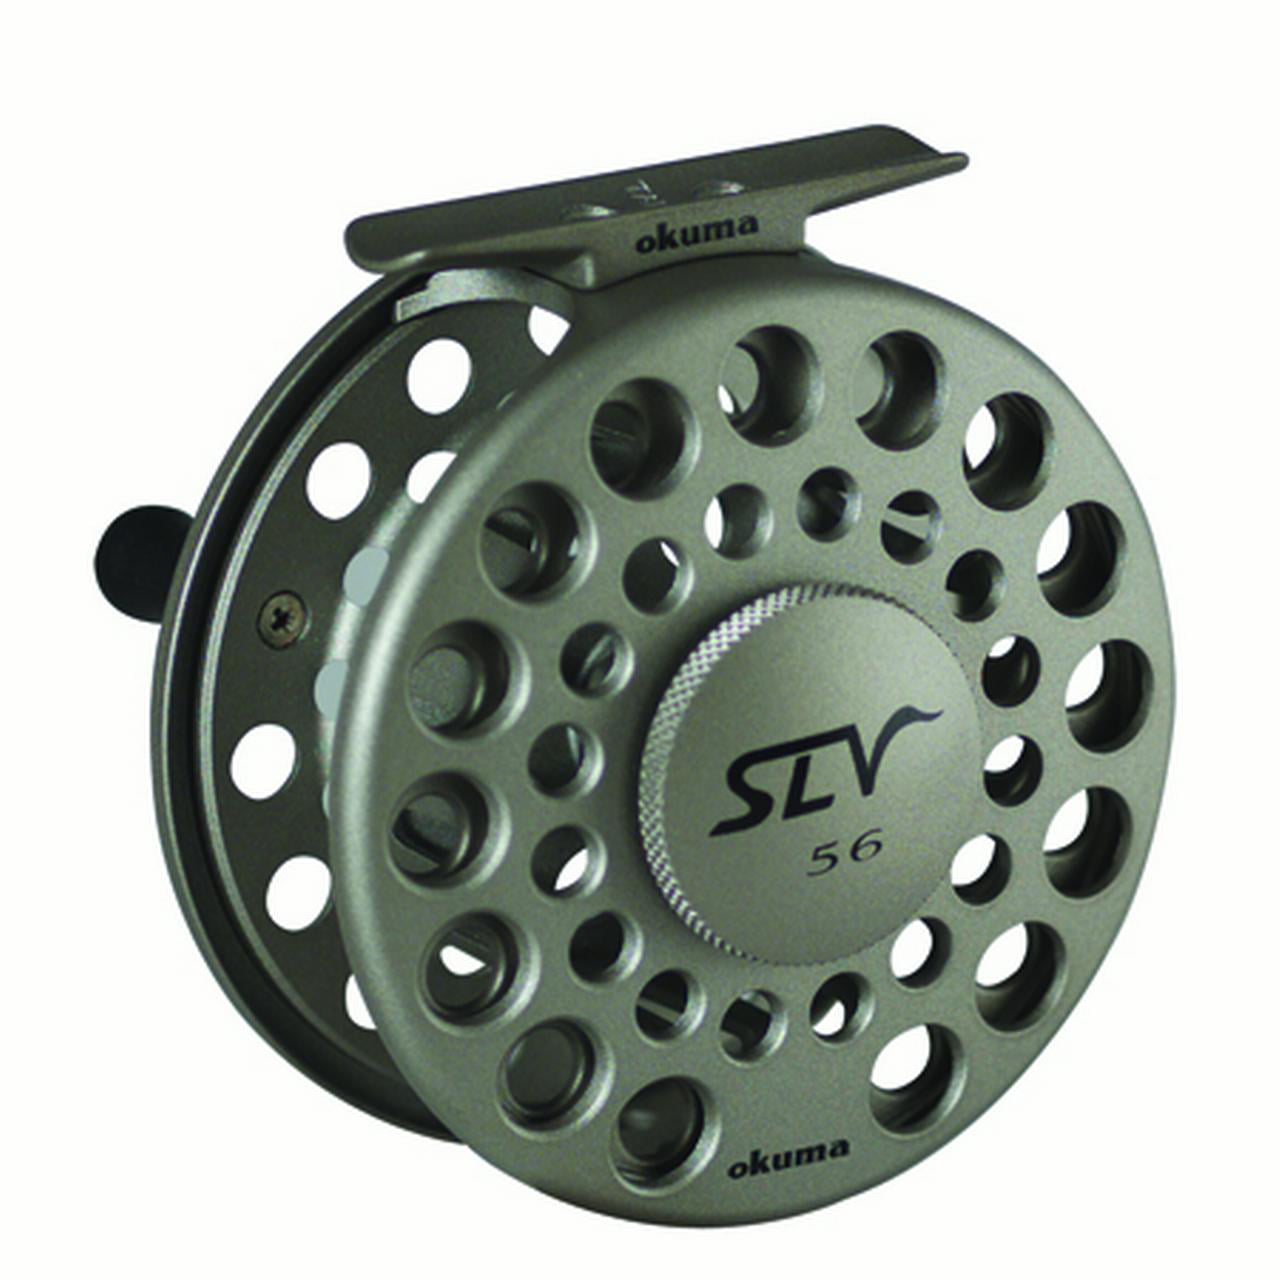 Okuma SLV Fly Reels - An Introduction, stainless steel, money